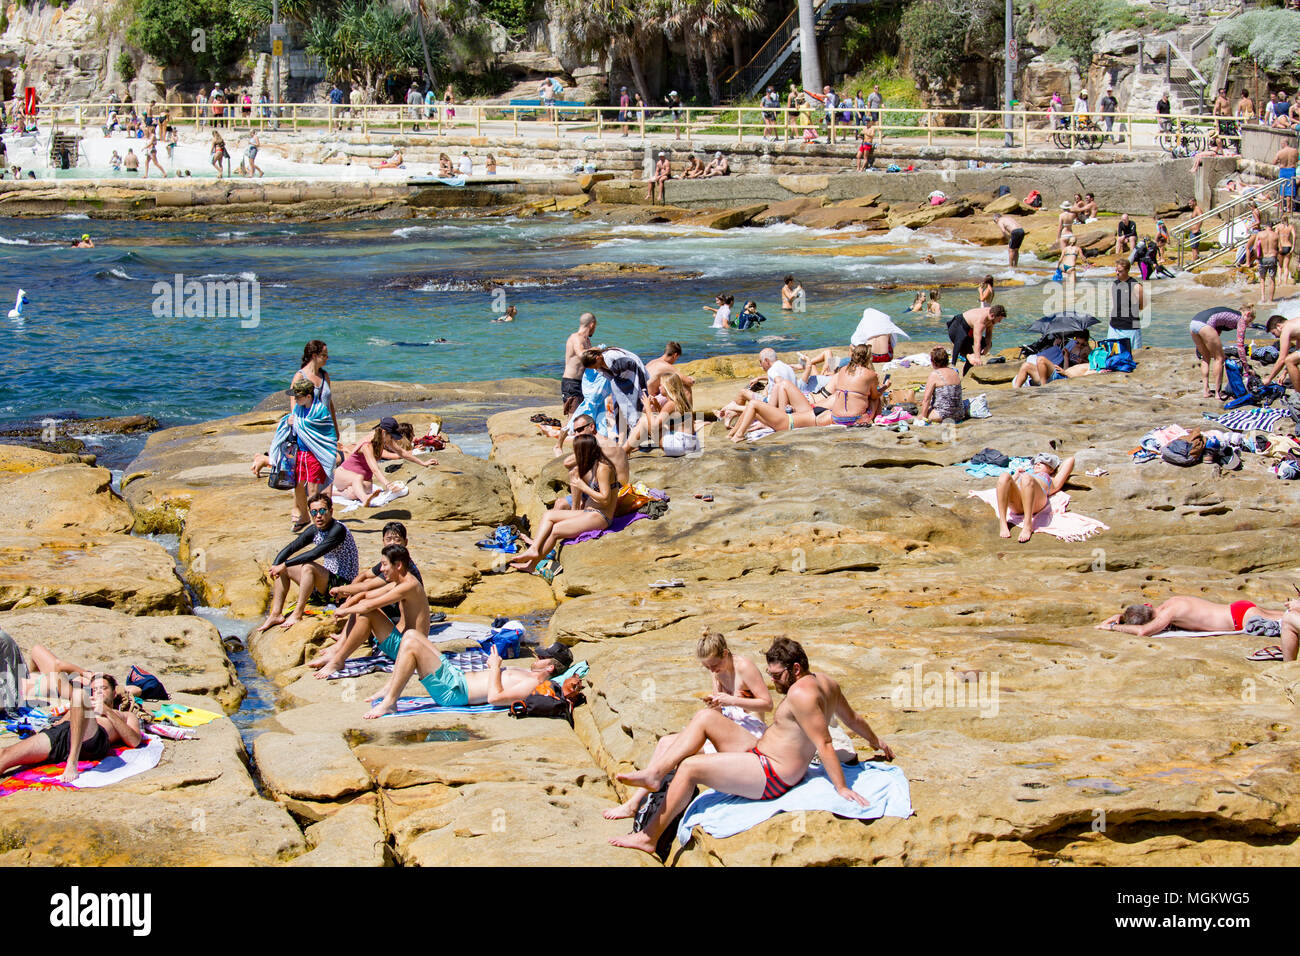 People sunbathing on the rocks at Fairy Bower between manly and shelly beach,Sydney,Australia Stock Photo